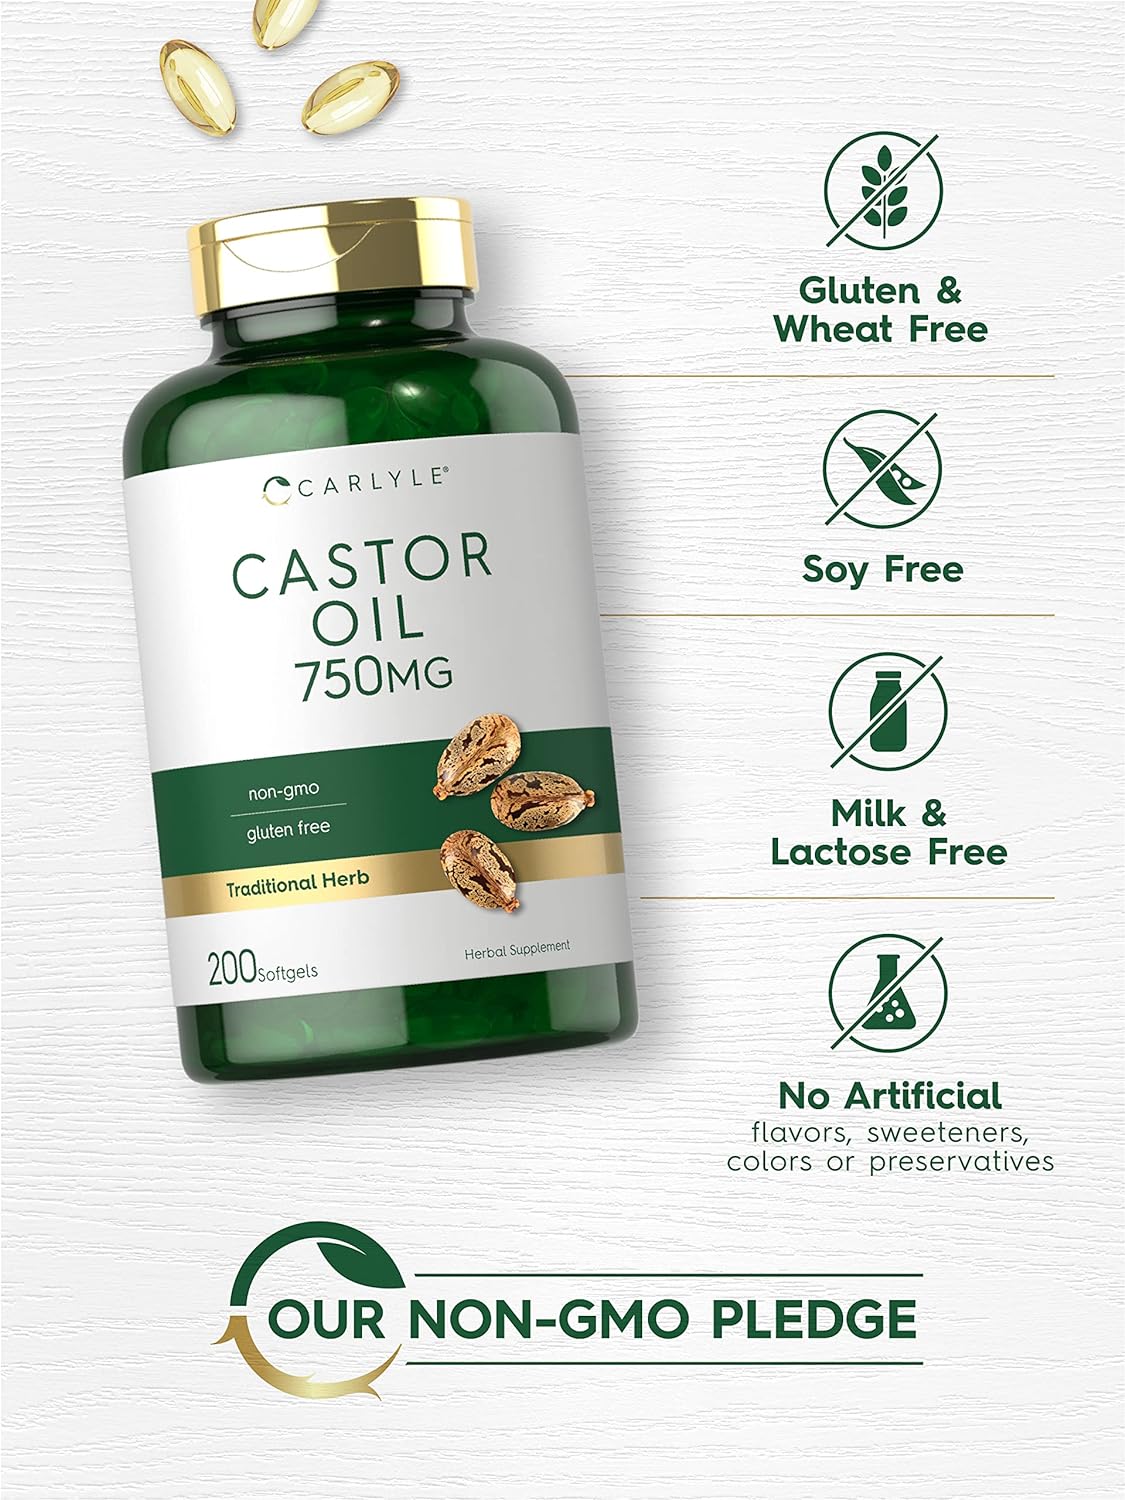 Carlyle Castor Oil 750mg | 200 Softgels | Traditional Herb | Non-GMO, 